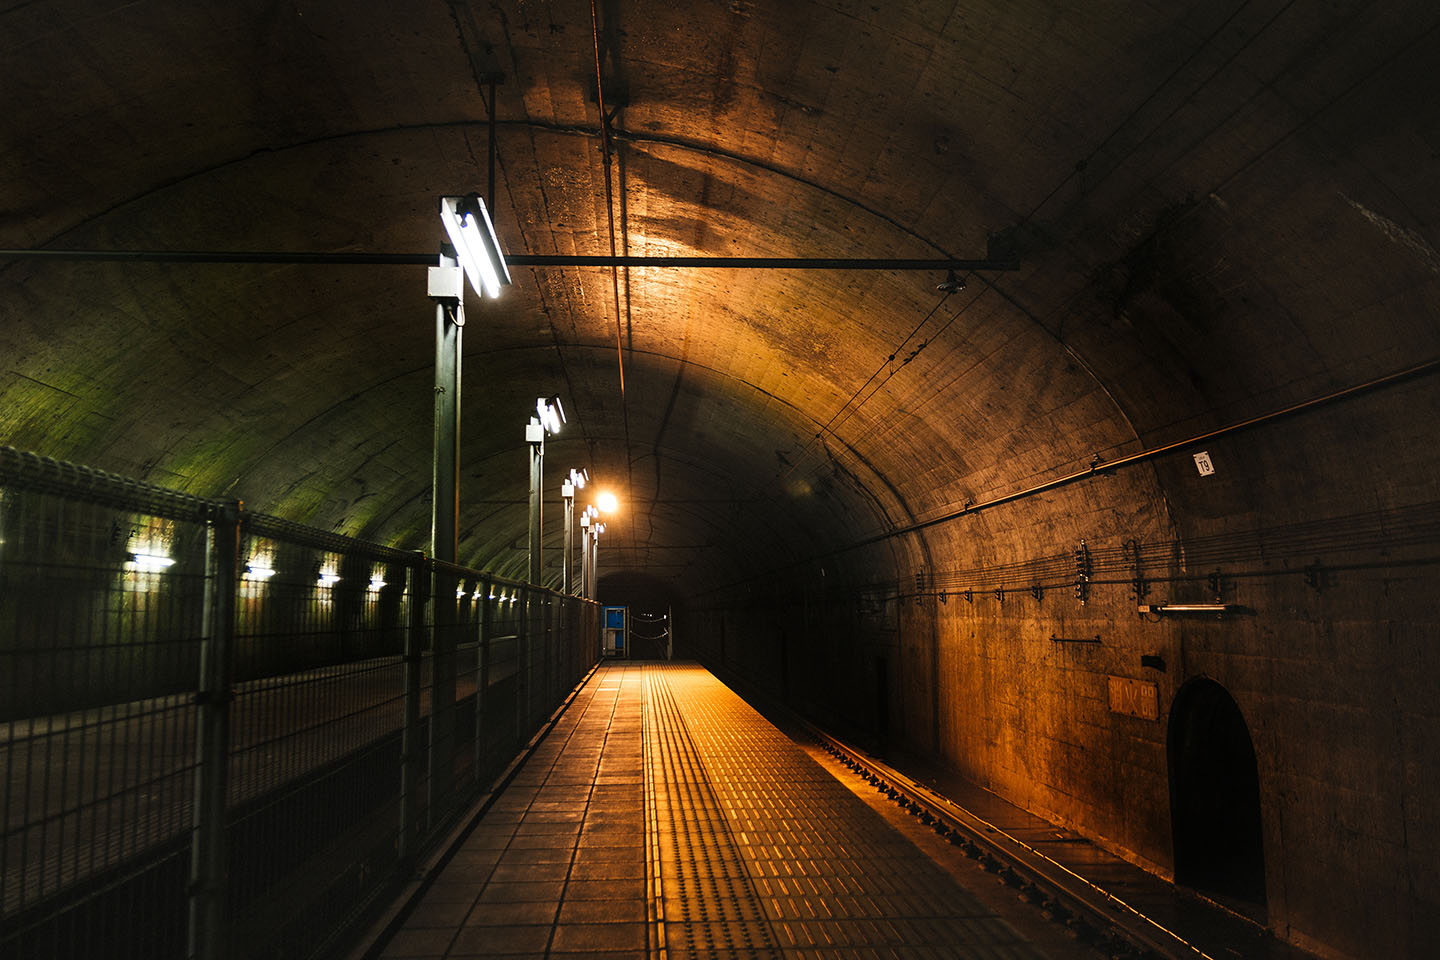 Doai Station: Deepest Mole Station in Japan